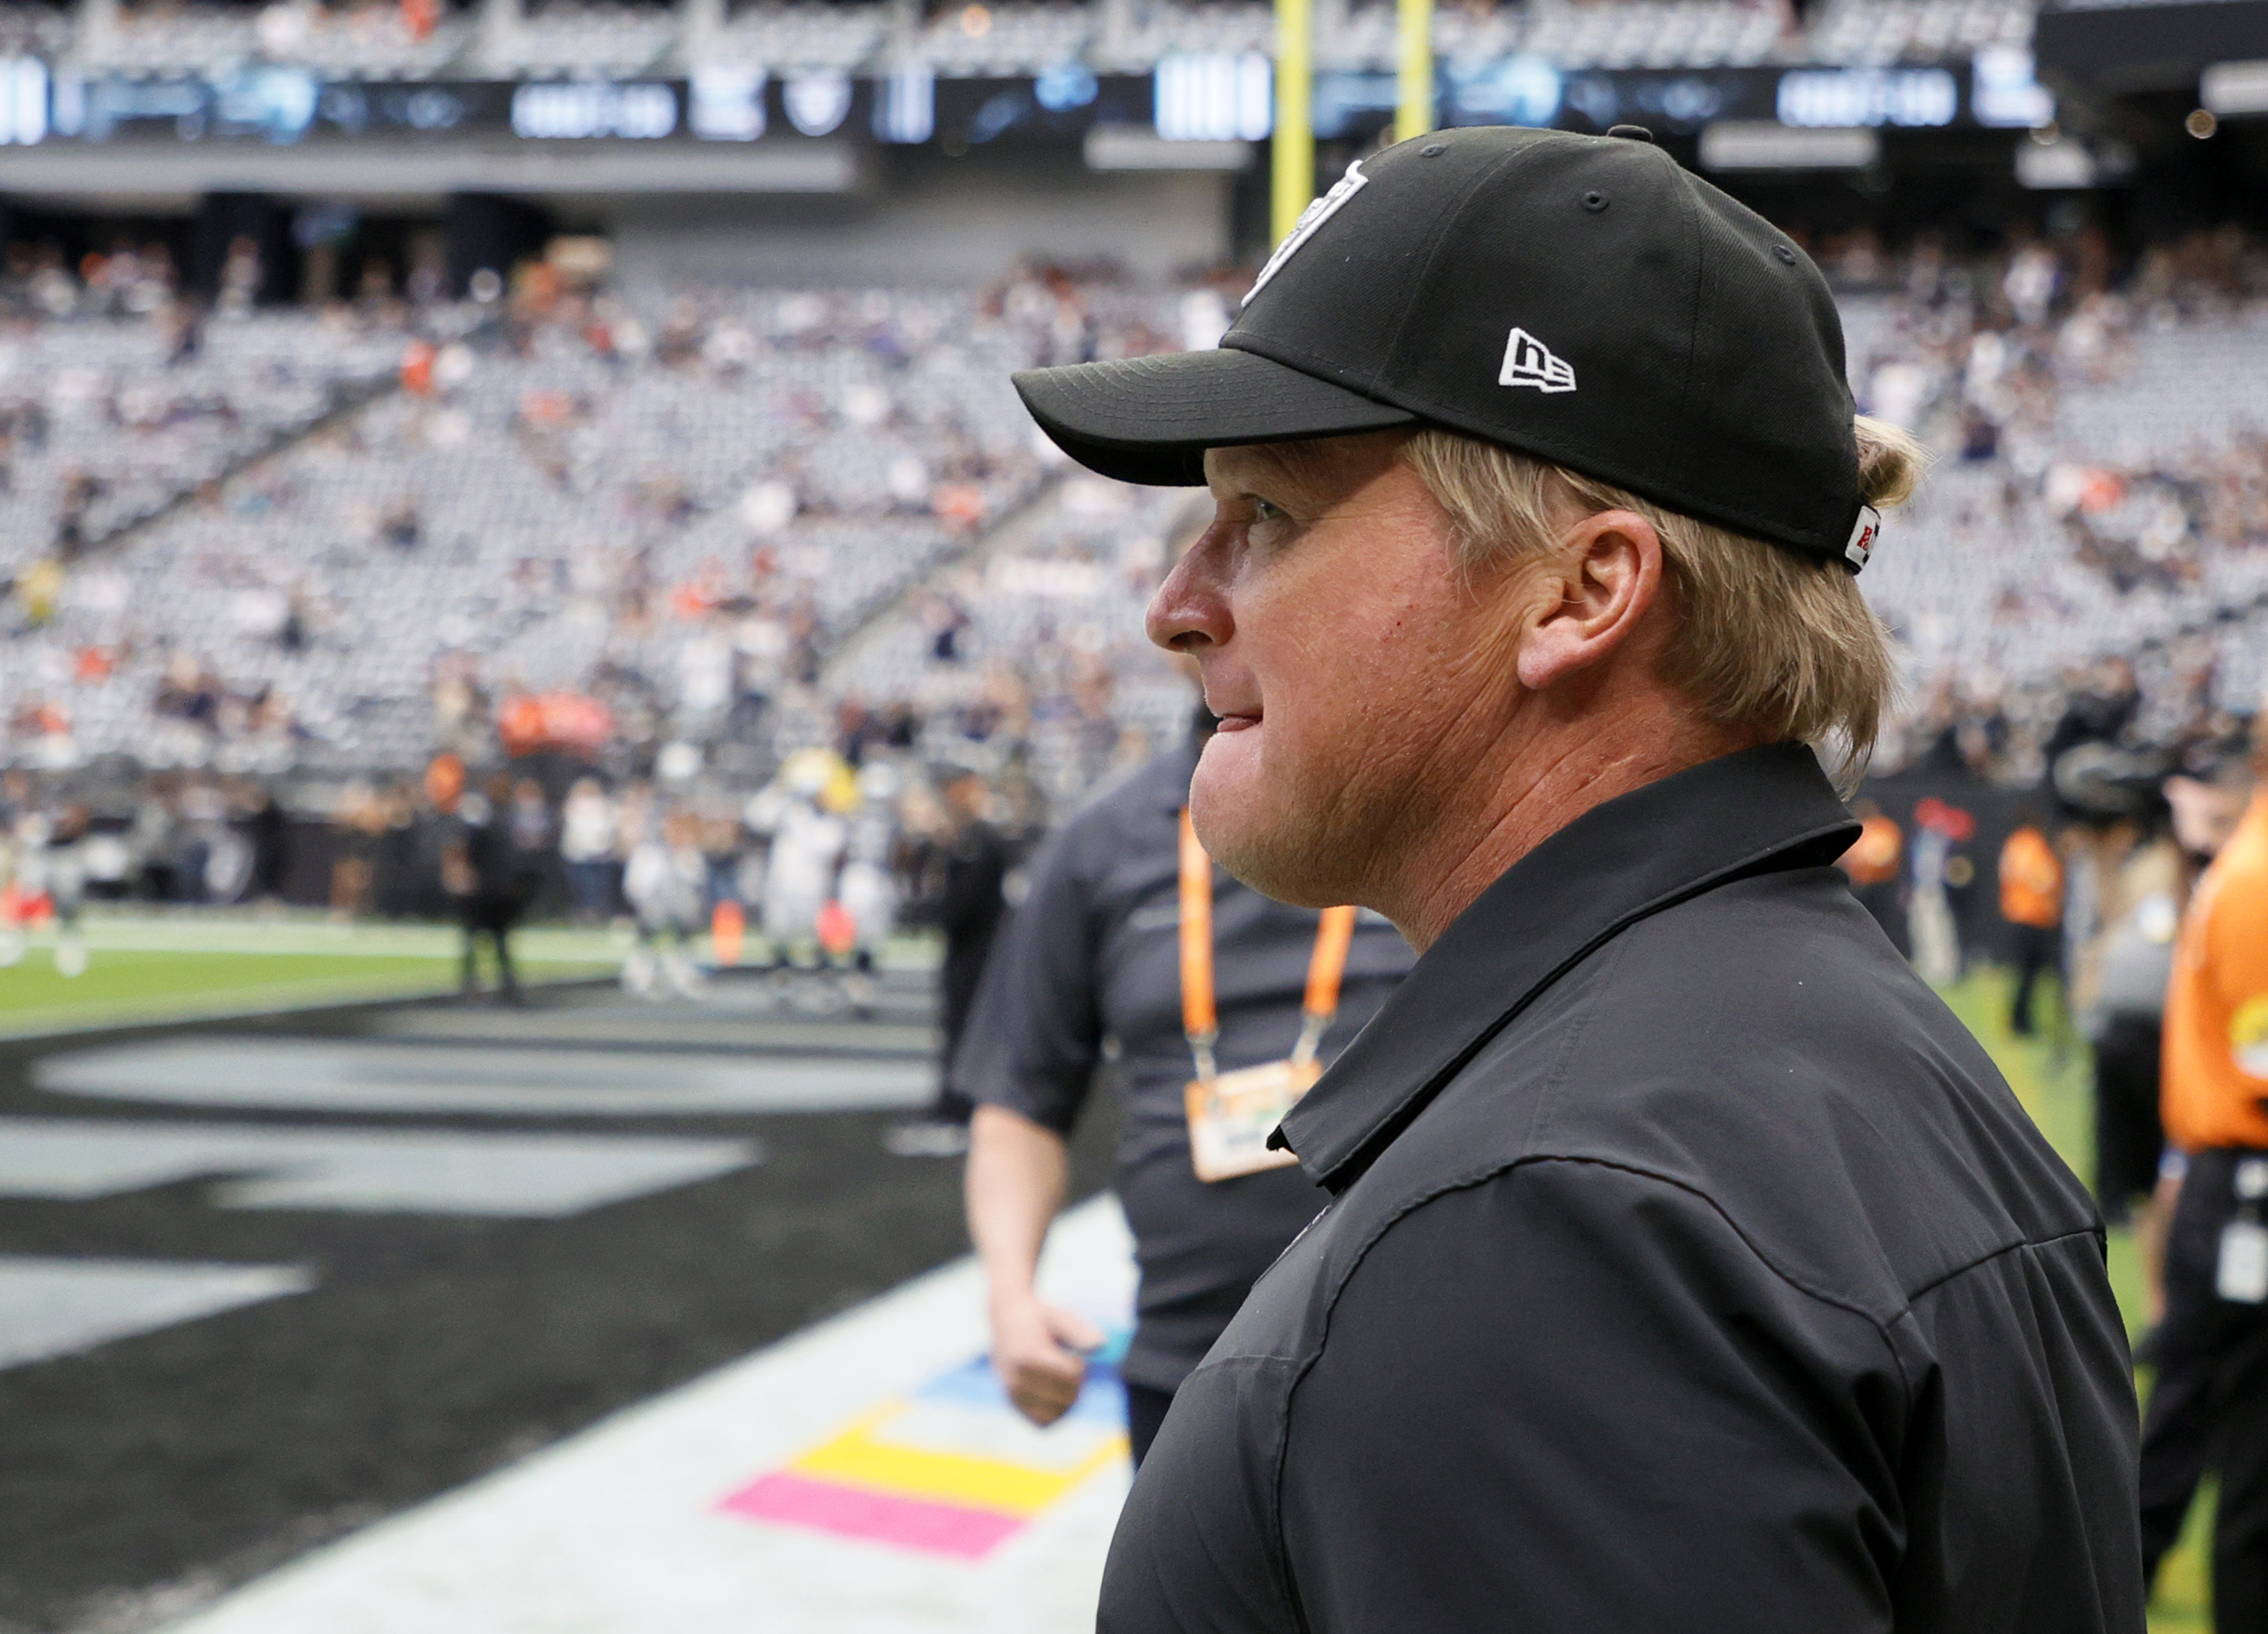 Jon Gruden of the Las Vegas Raiders walks on the field before a game against the Chicago Bears at Allegiant Stadium on October 10, 2021 in Las Vegas, Nevada. The Bears defeated the Raiders 20-9. (Getty Images&mdash;2021 Getty Images)